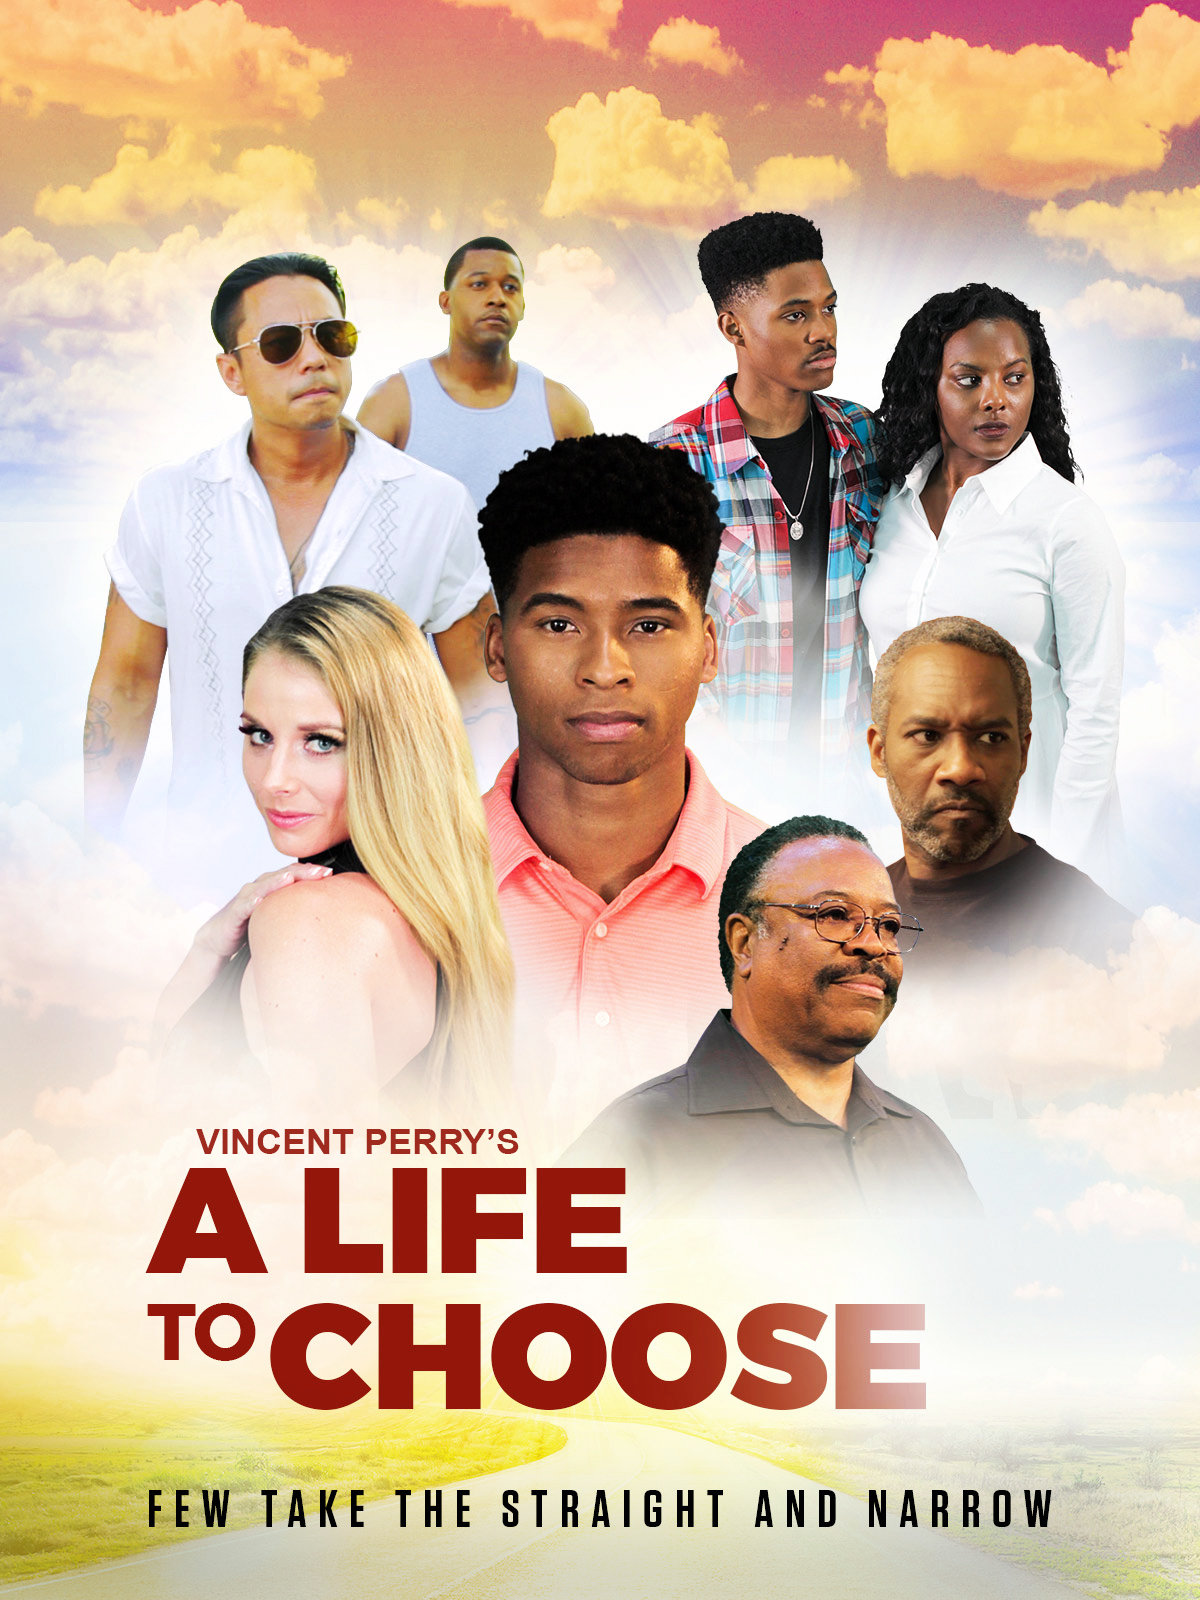 A Life to Choose (2019)